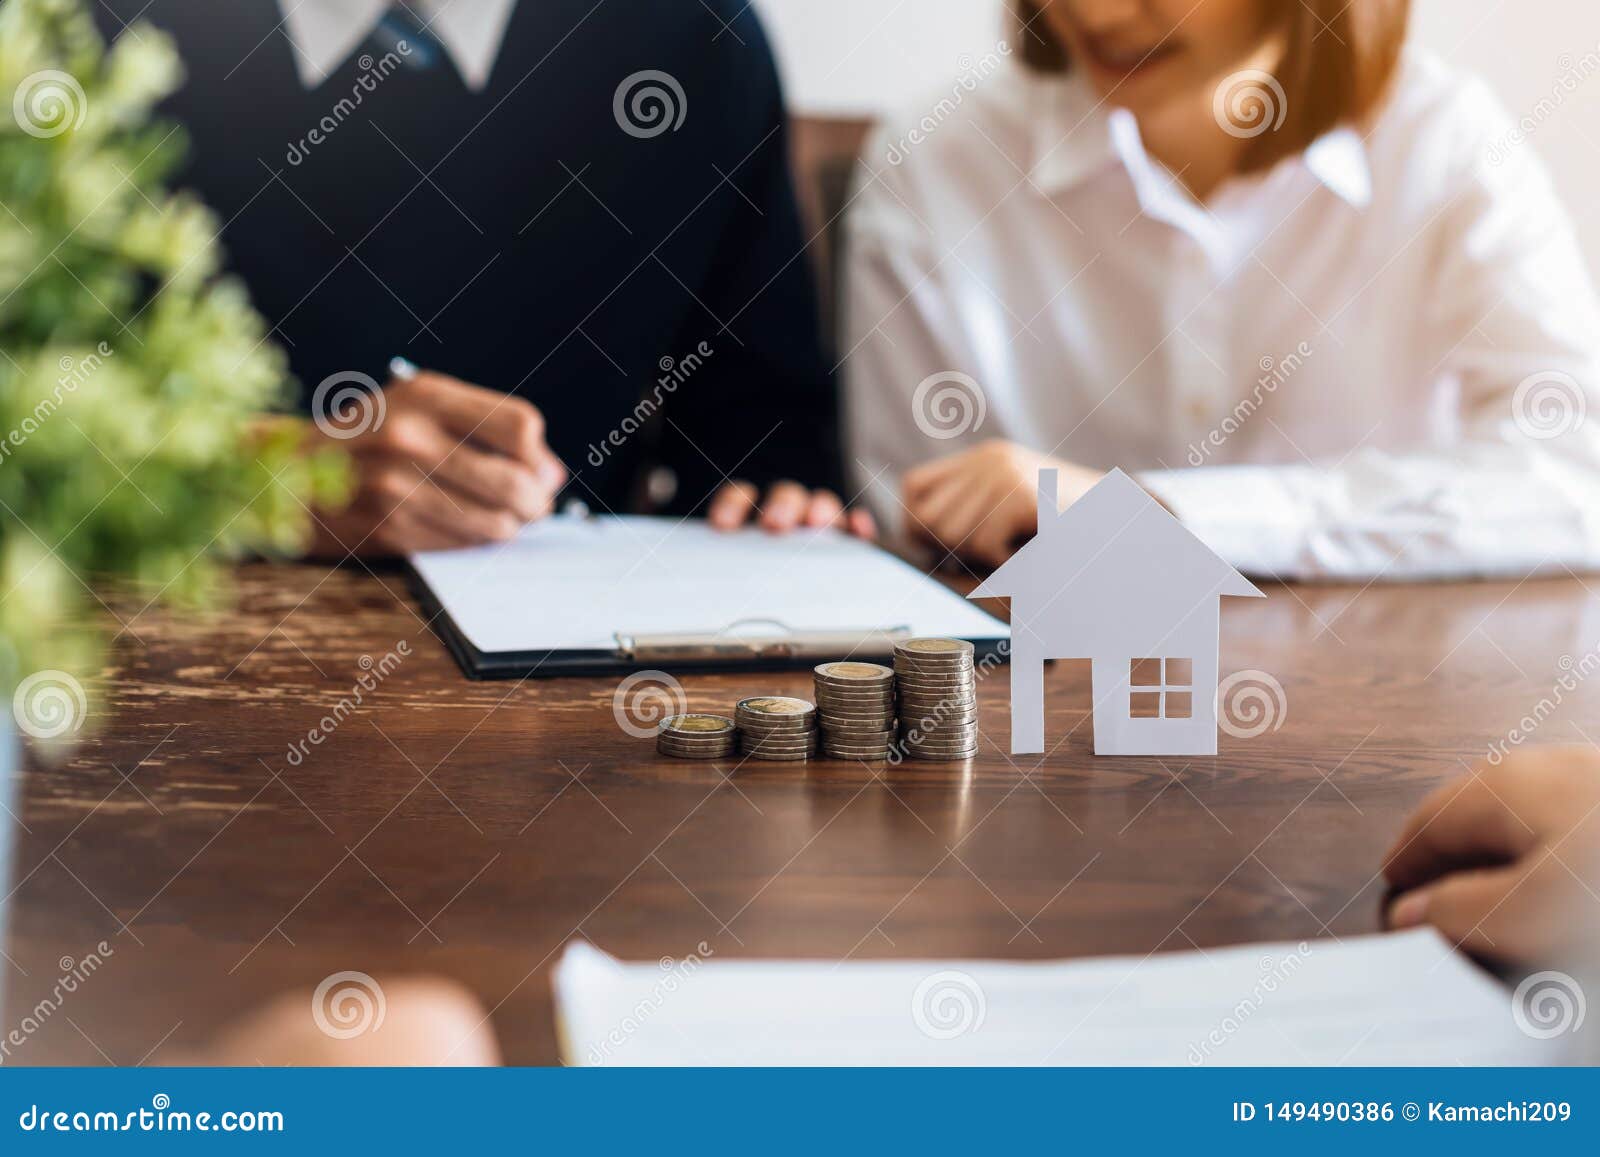 couples signed a contract to buy a house from the broker. coin to stack money and model houses placed on the table.